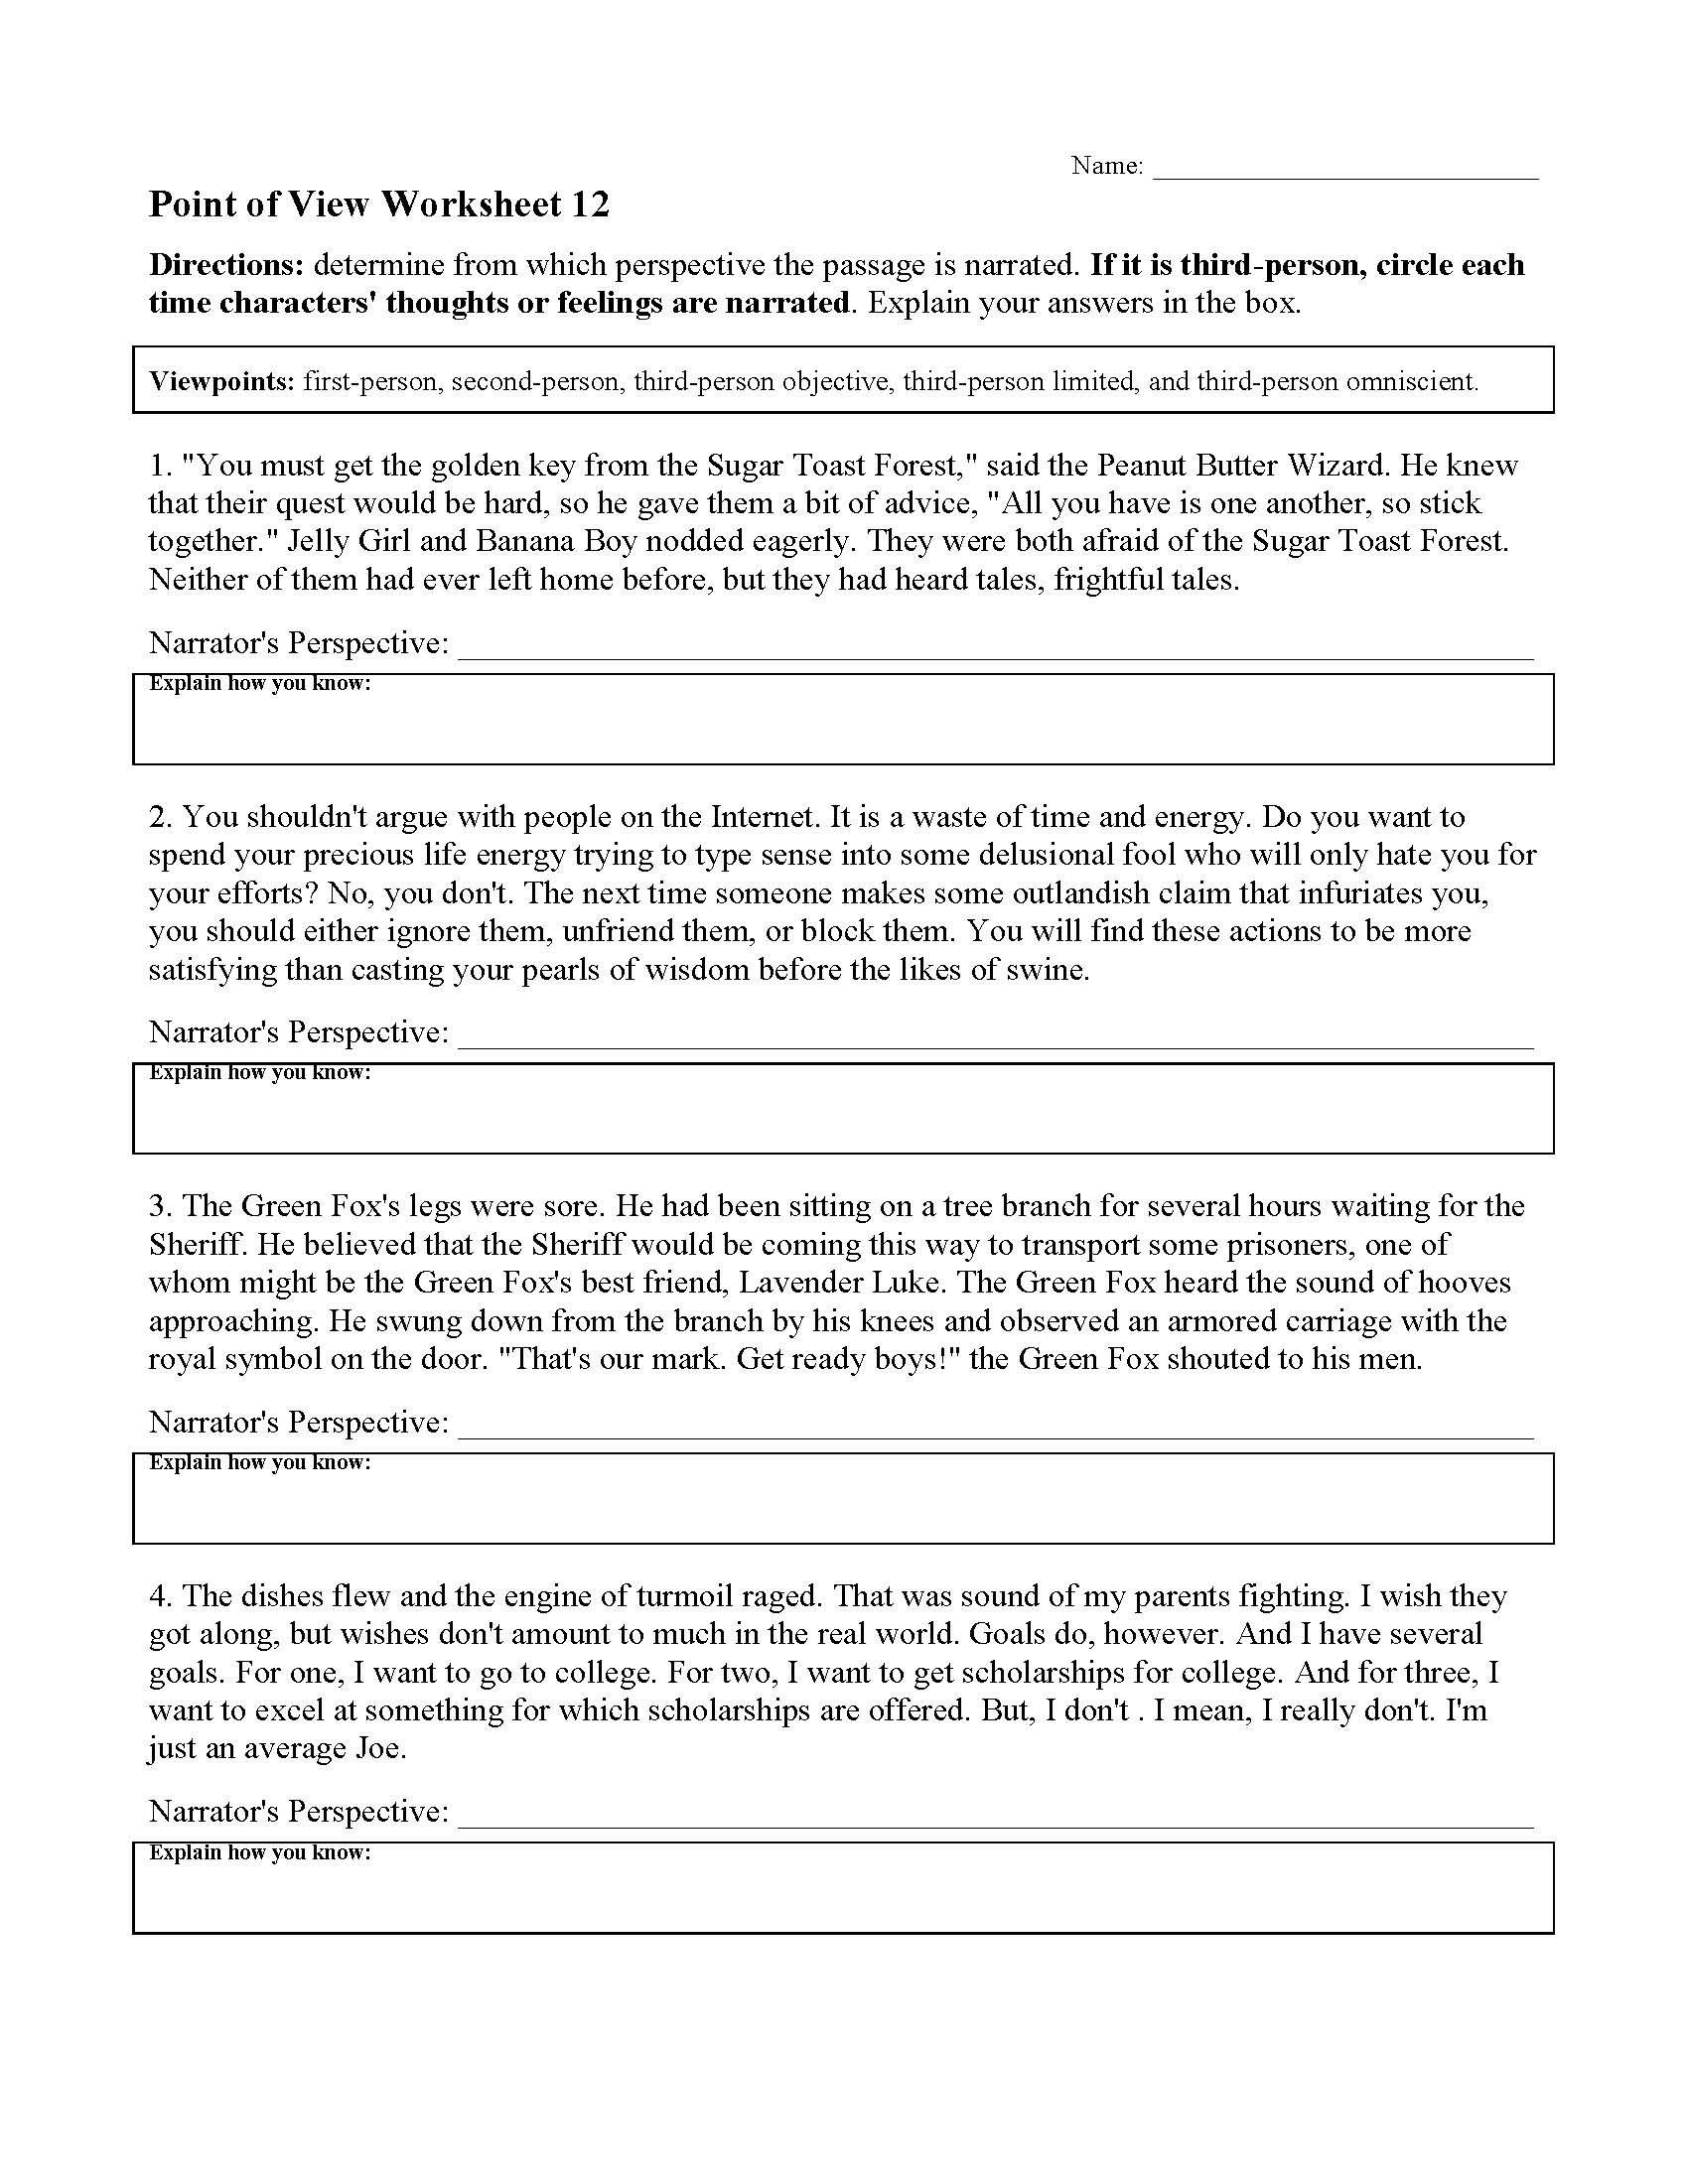 point-of-view-worksheet-12-preview